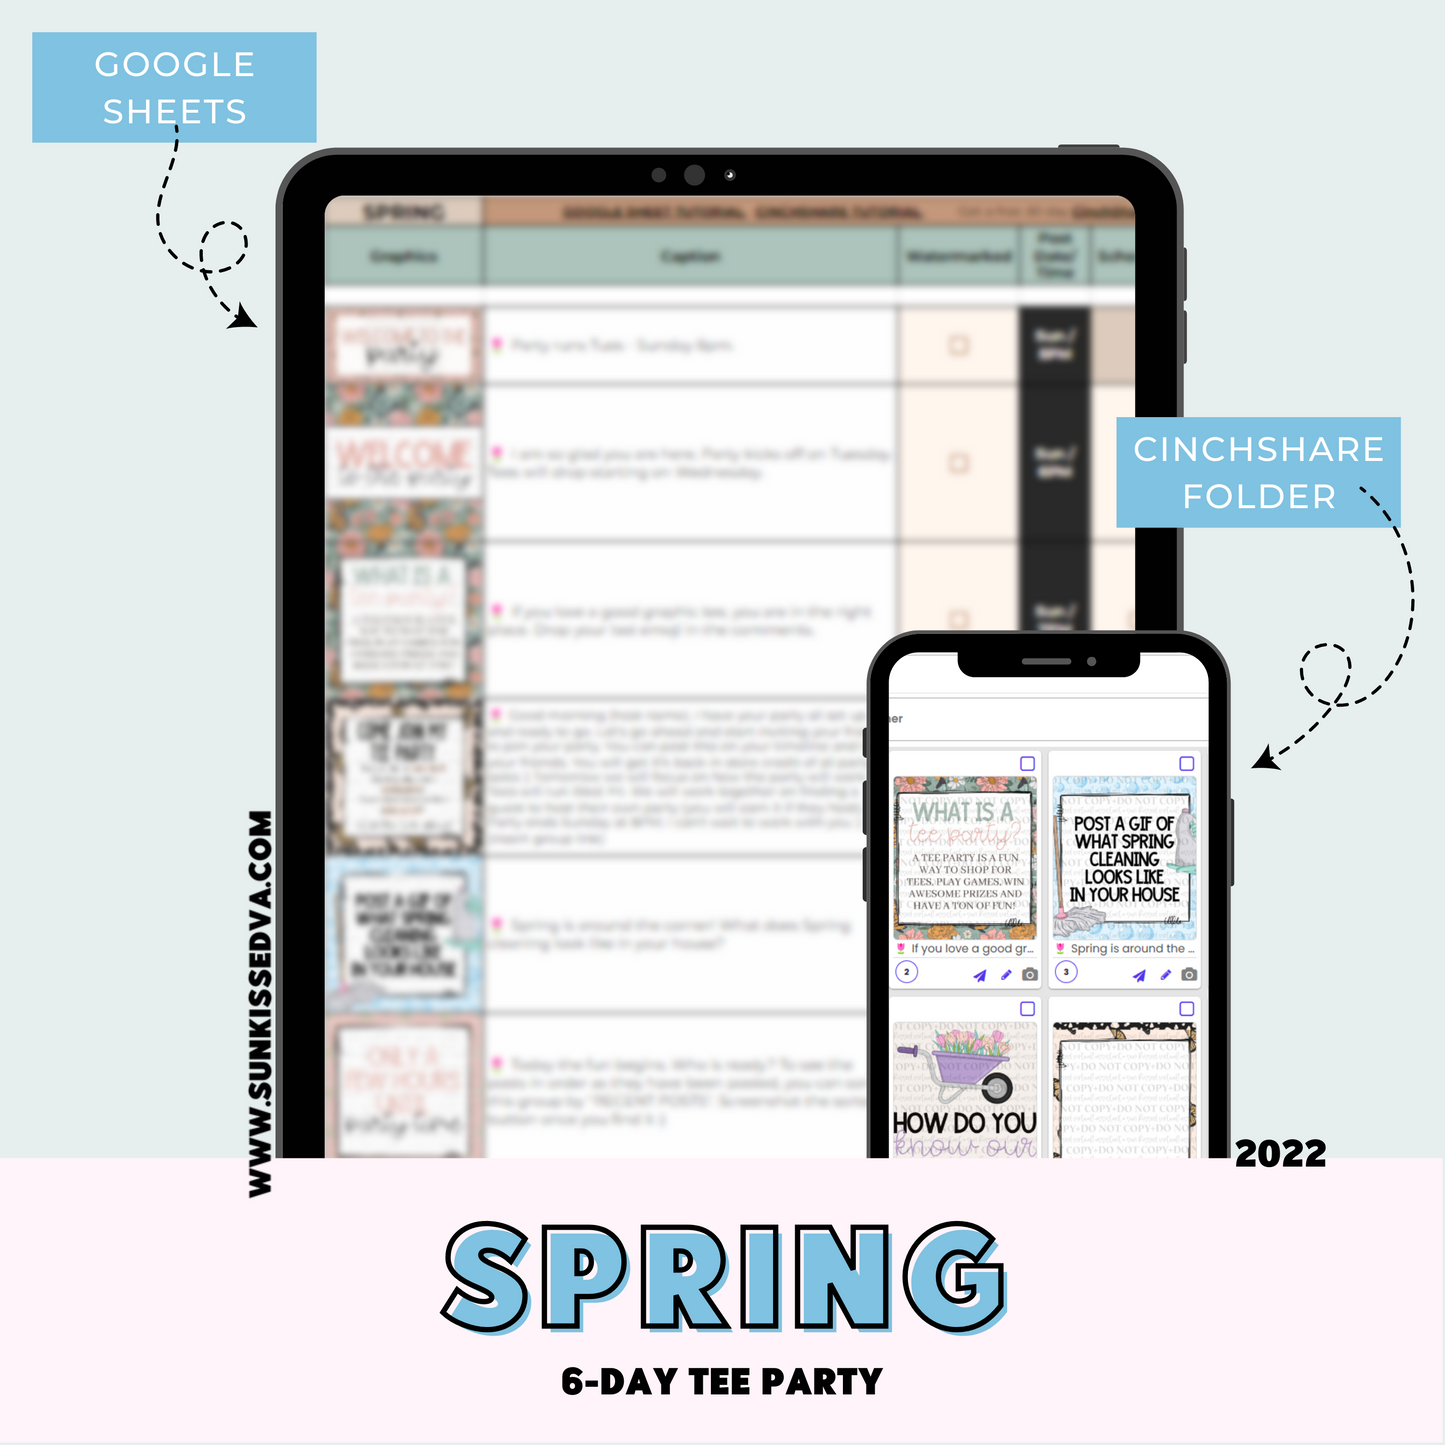 Spring Tee Party Planner | Sun Kissed Virtual Assistant